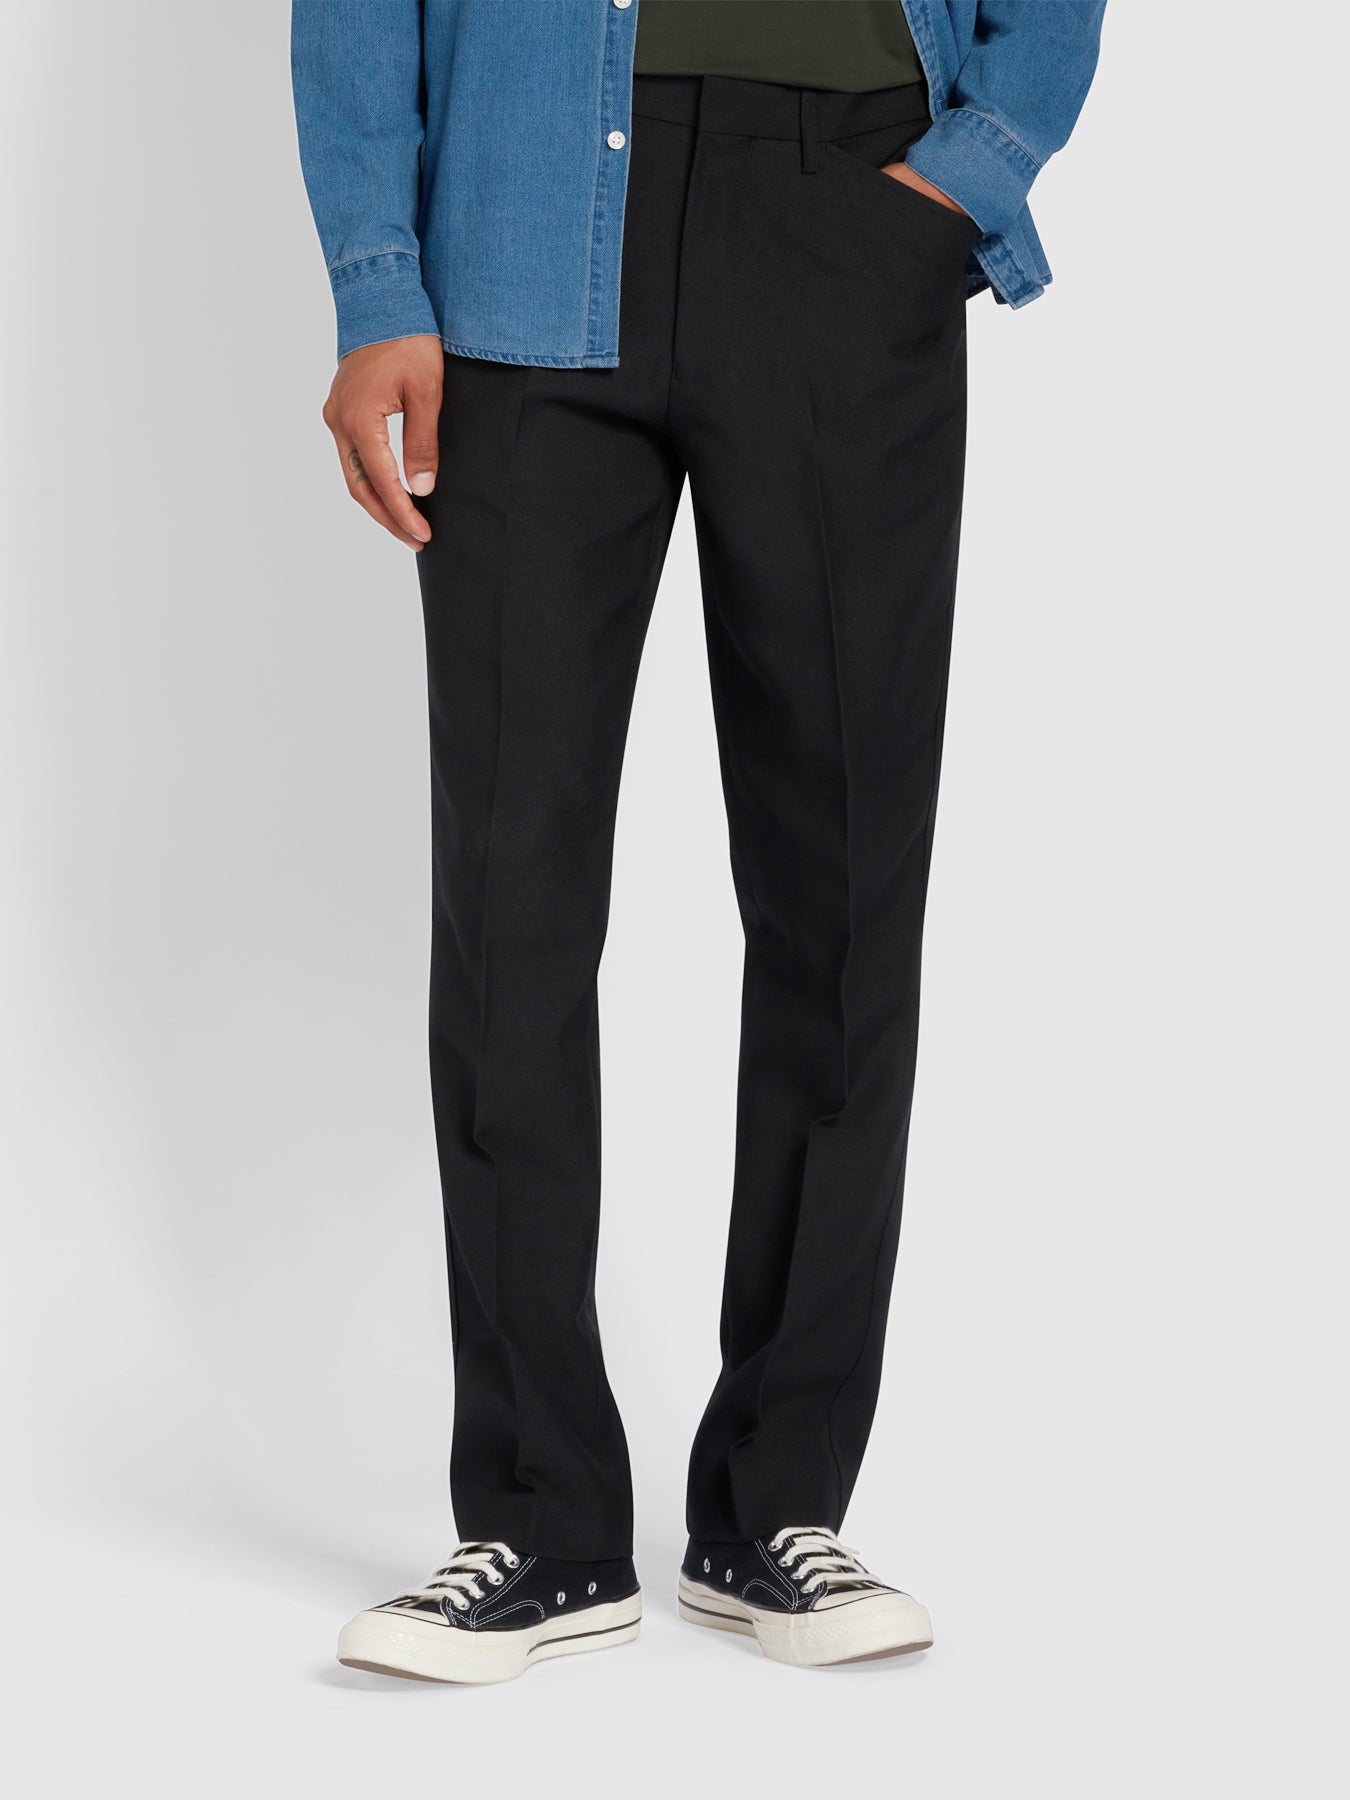 View Hopsack Trouser In Black information